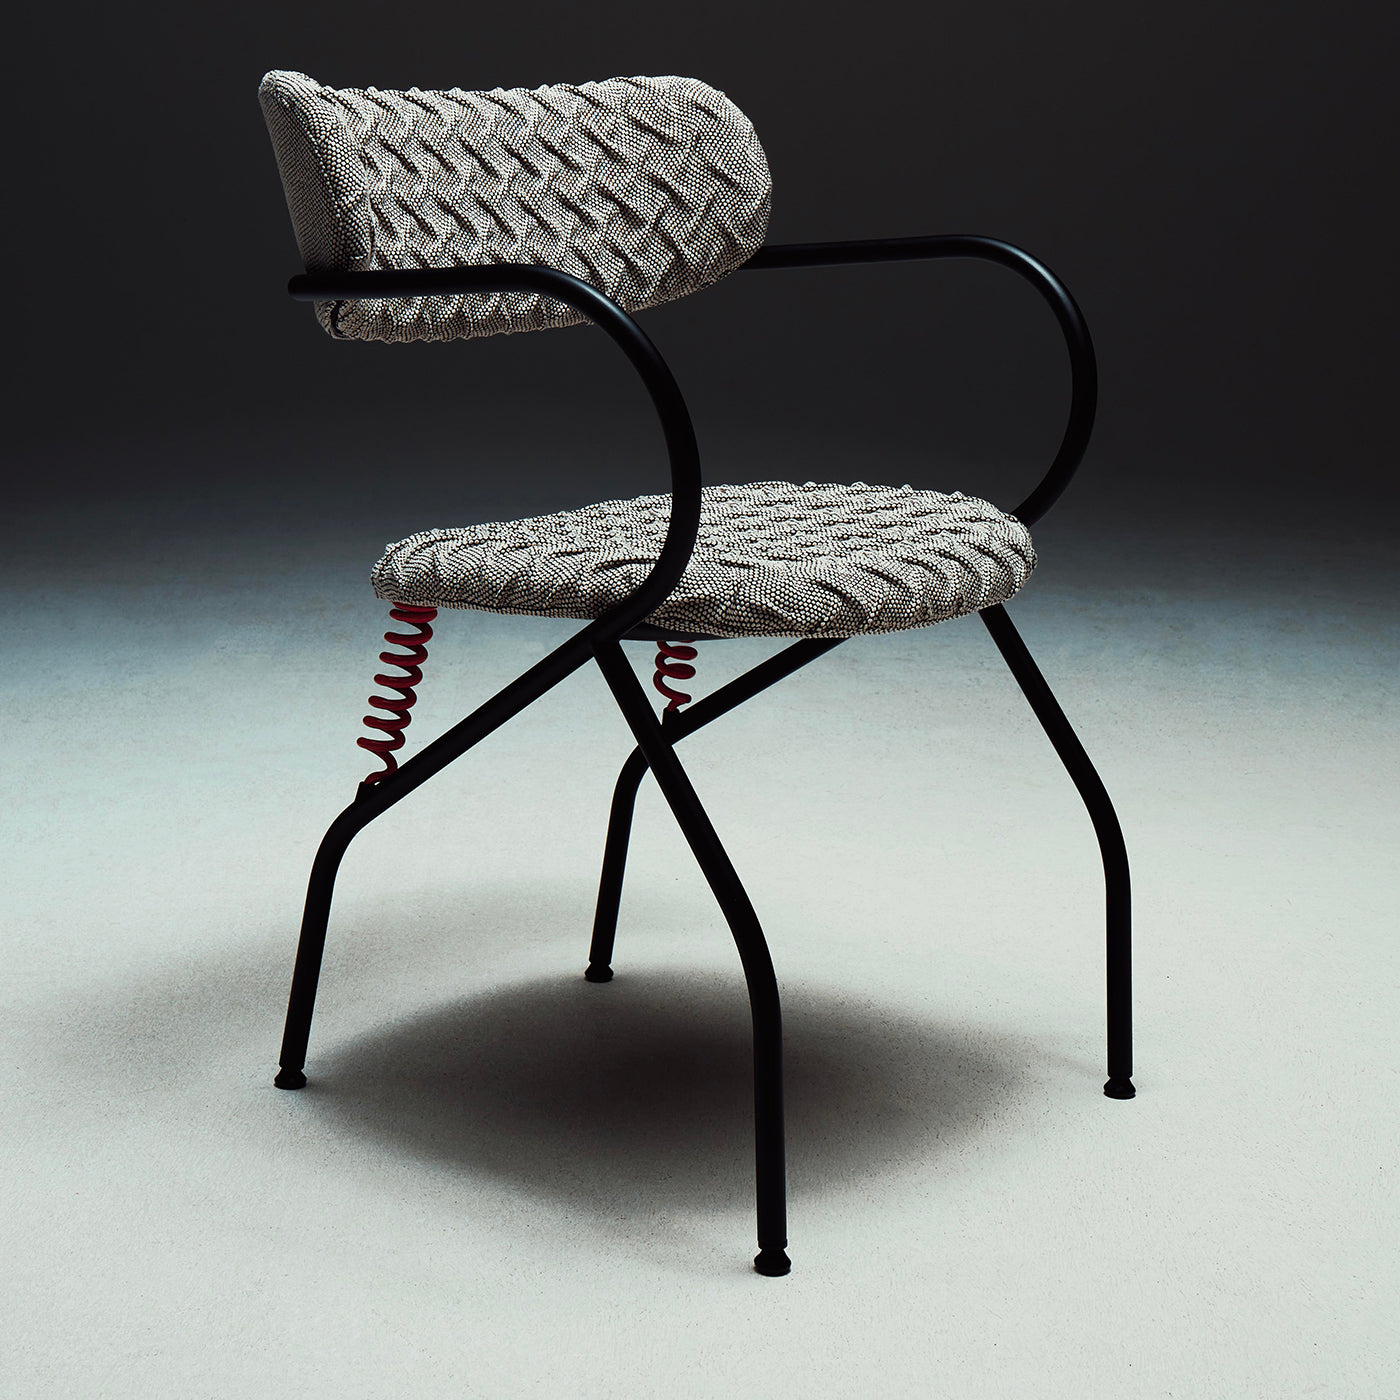 Spring Chair by Front - Alternative view 1